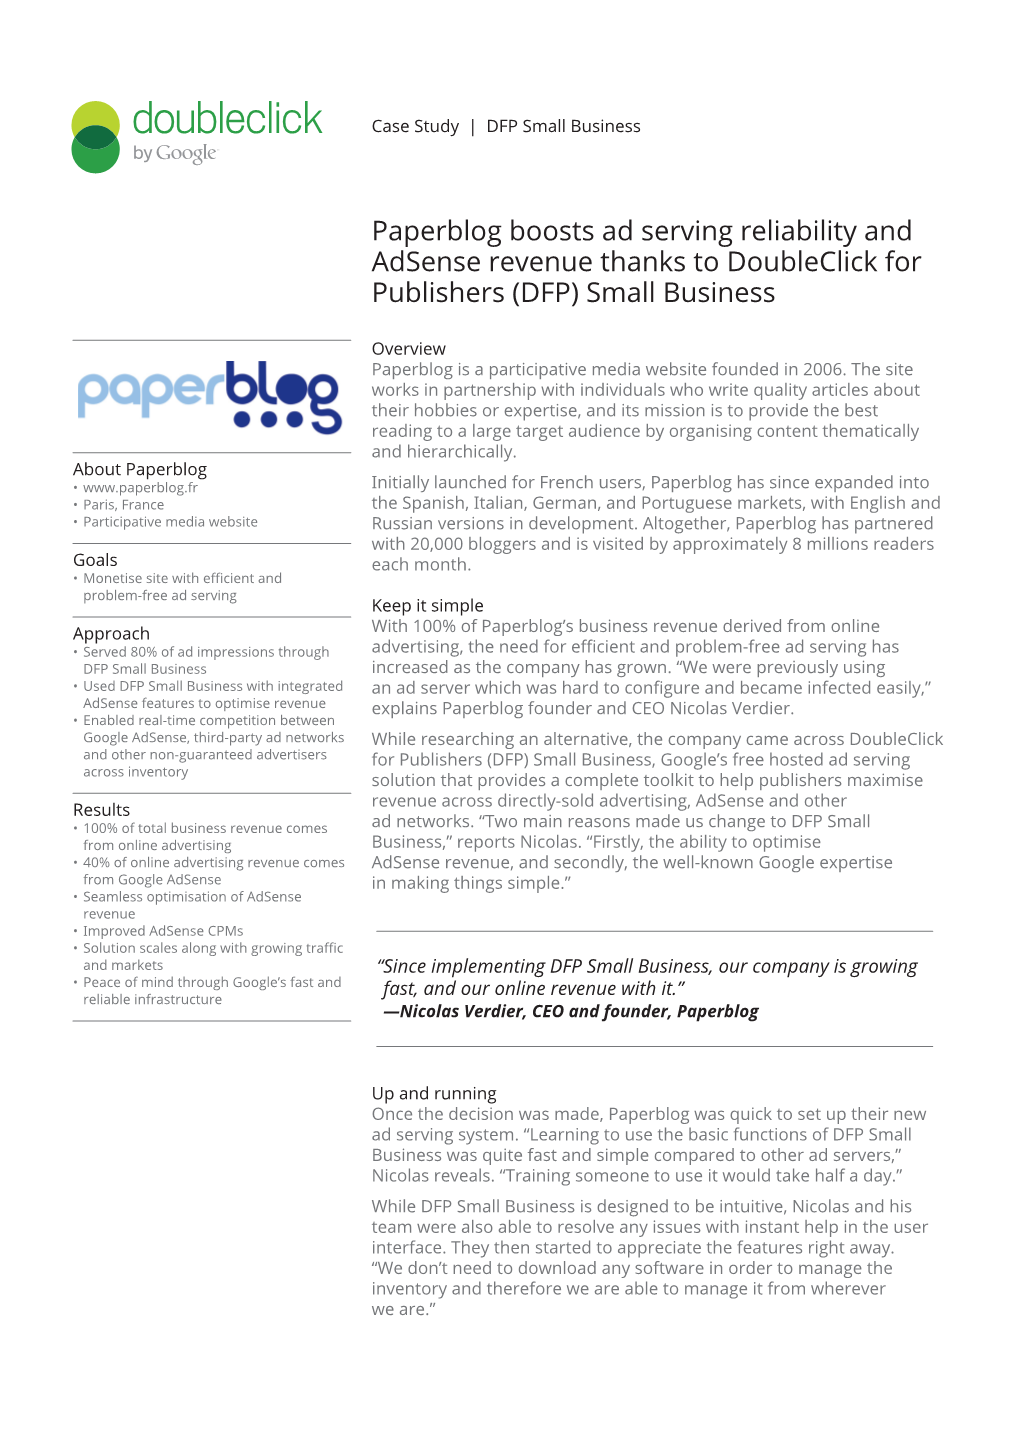 Paperblog Boosts Ad Serving Reliability and Adsense Revenue Thanks to Doubleclick for Publishers (DFP) Small Business